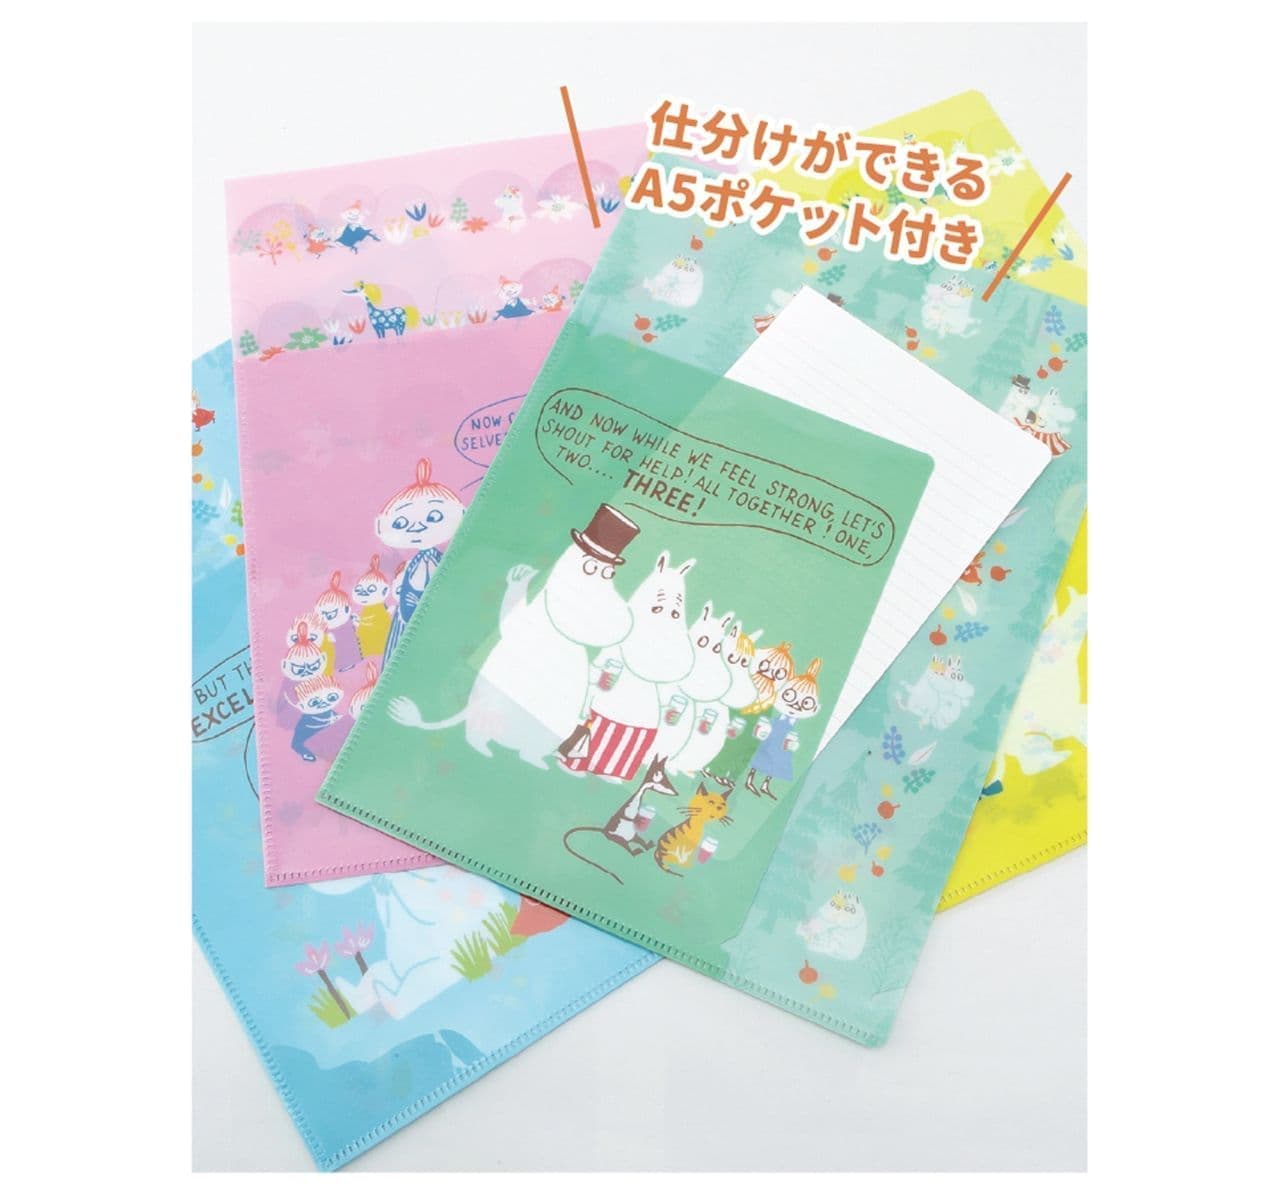 Moomin stationery series "A4 File with Pocket